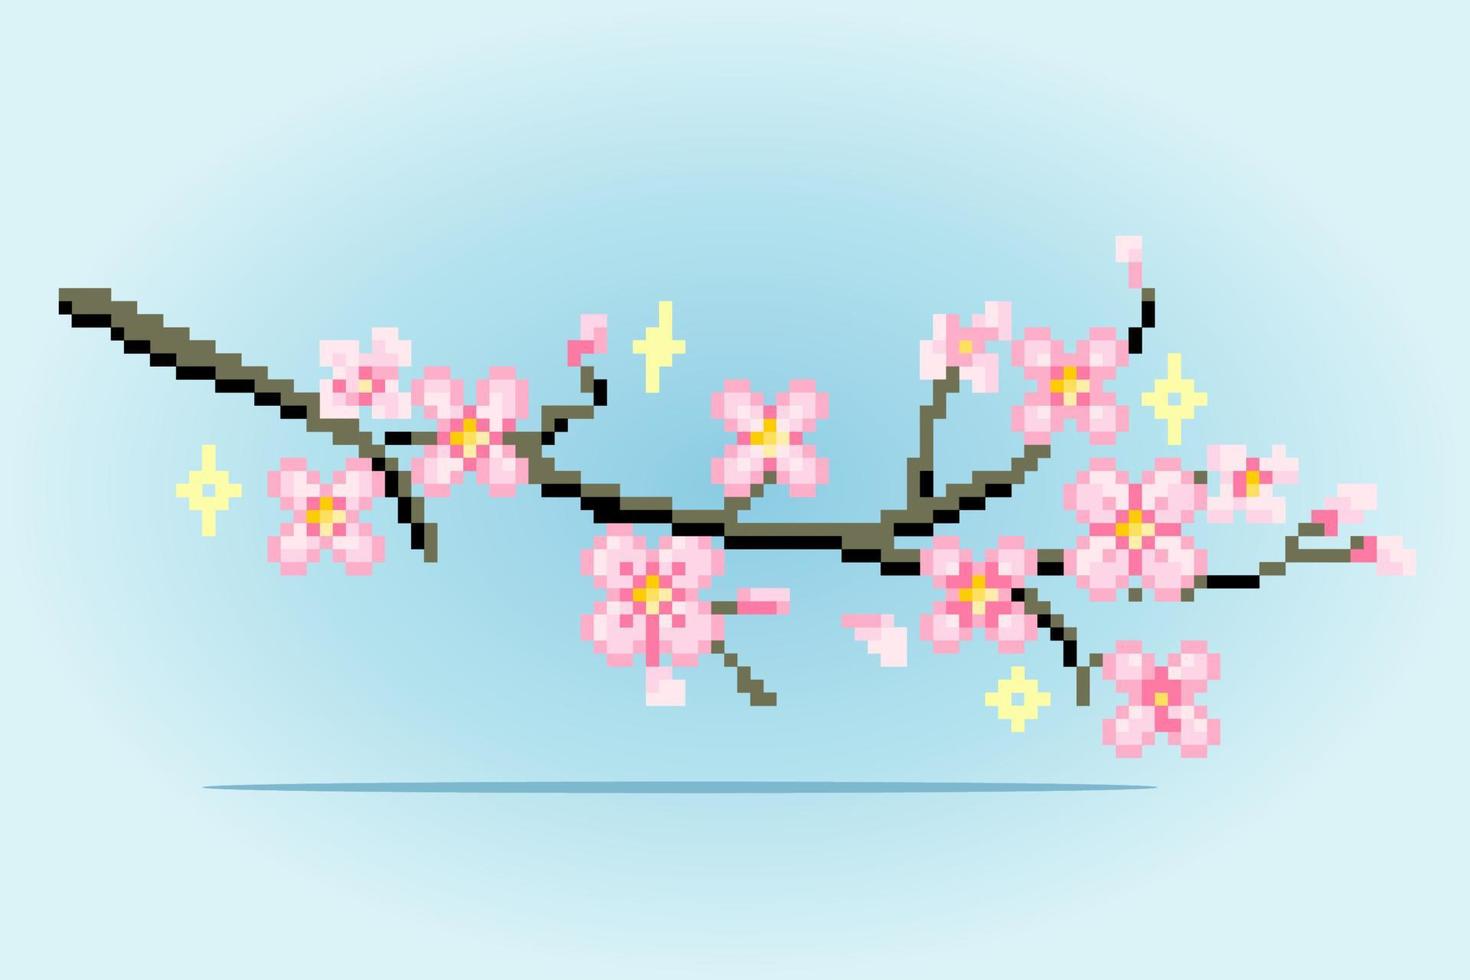 8 bit pixel flower of Cherry blossom. japanese flowers for cross stitch patterns, in vector illustrations.